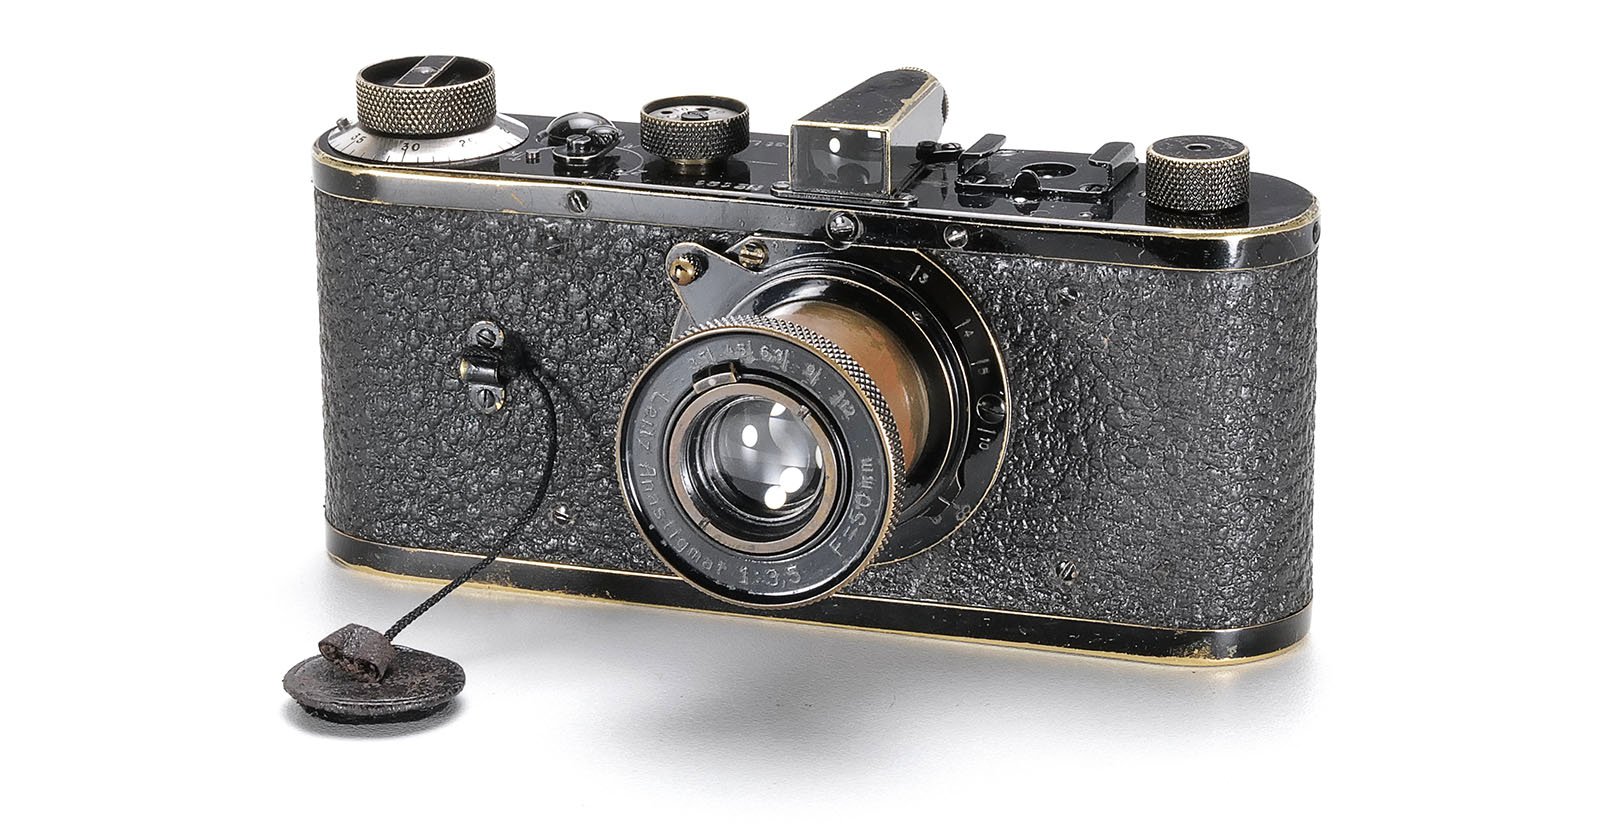 Rare Leica 0-Series Camera Sells for a Whopping $3.7 Million